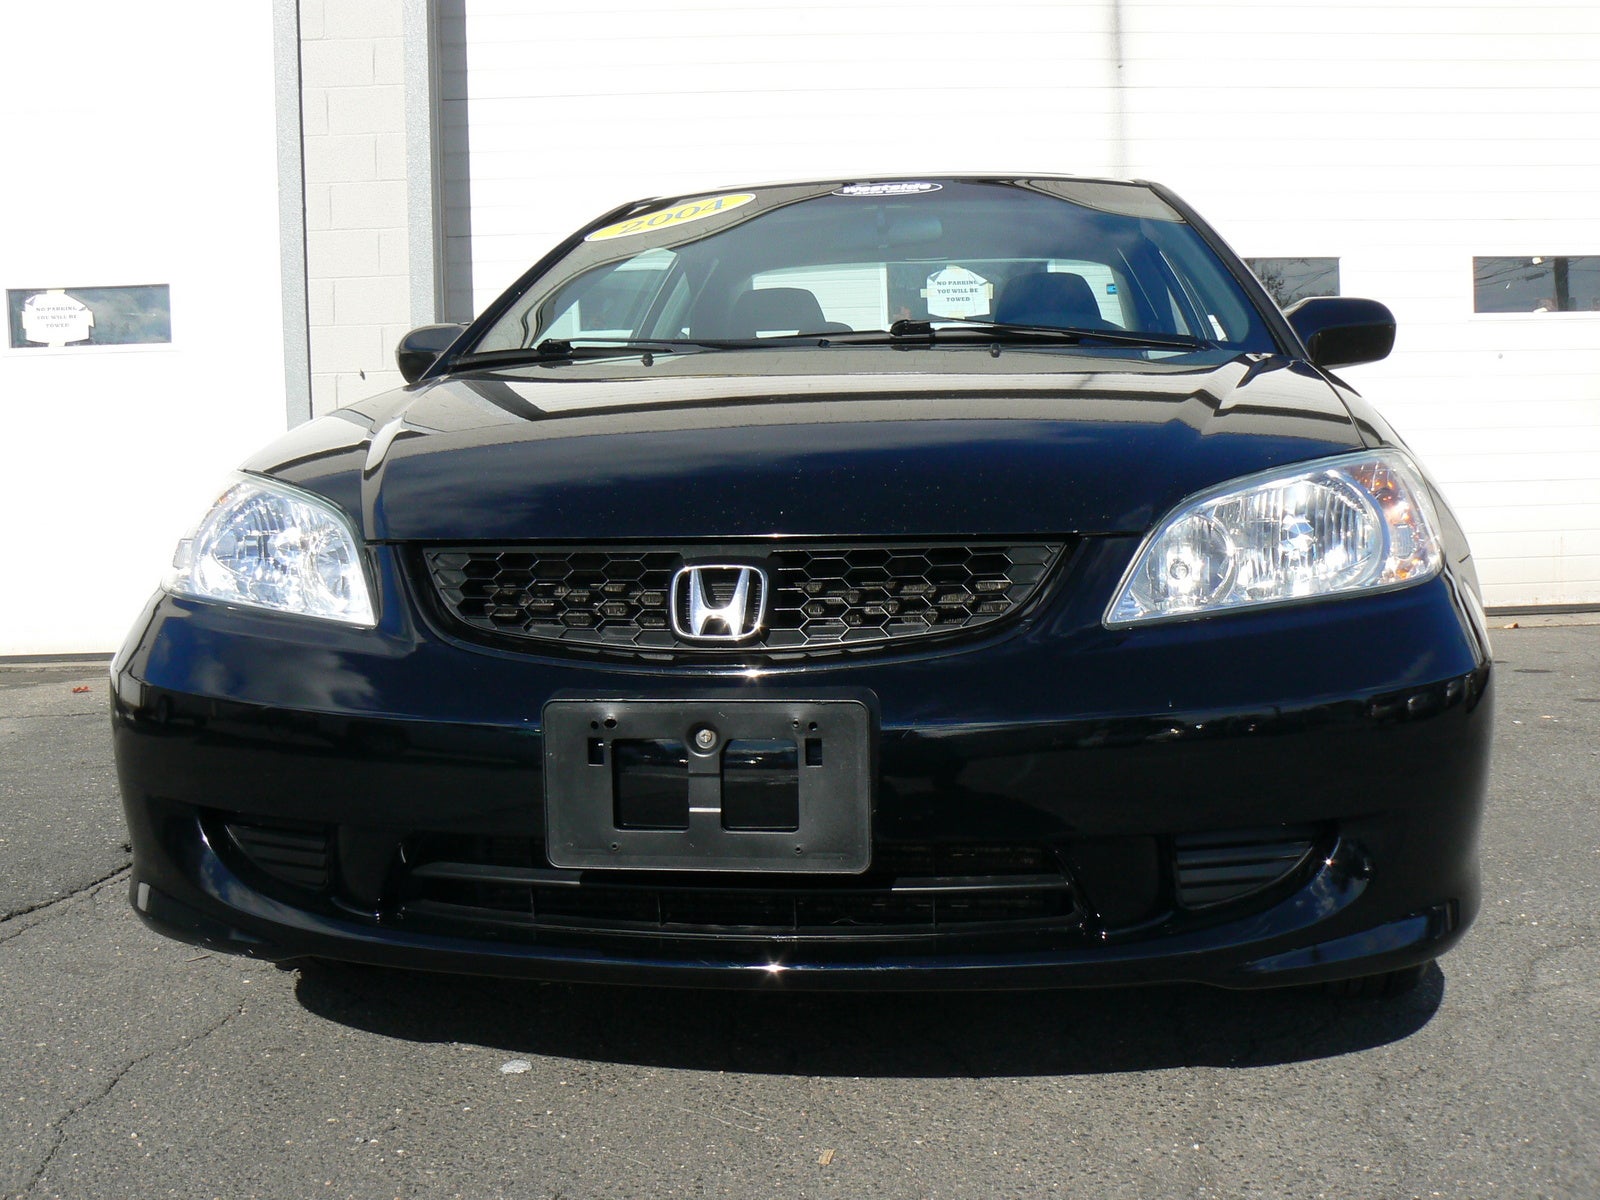 2004 Honda civic ex coupe specifications #7